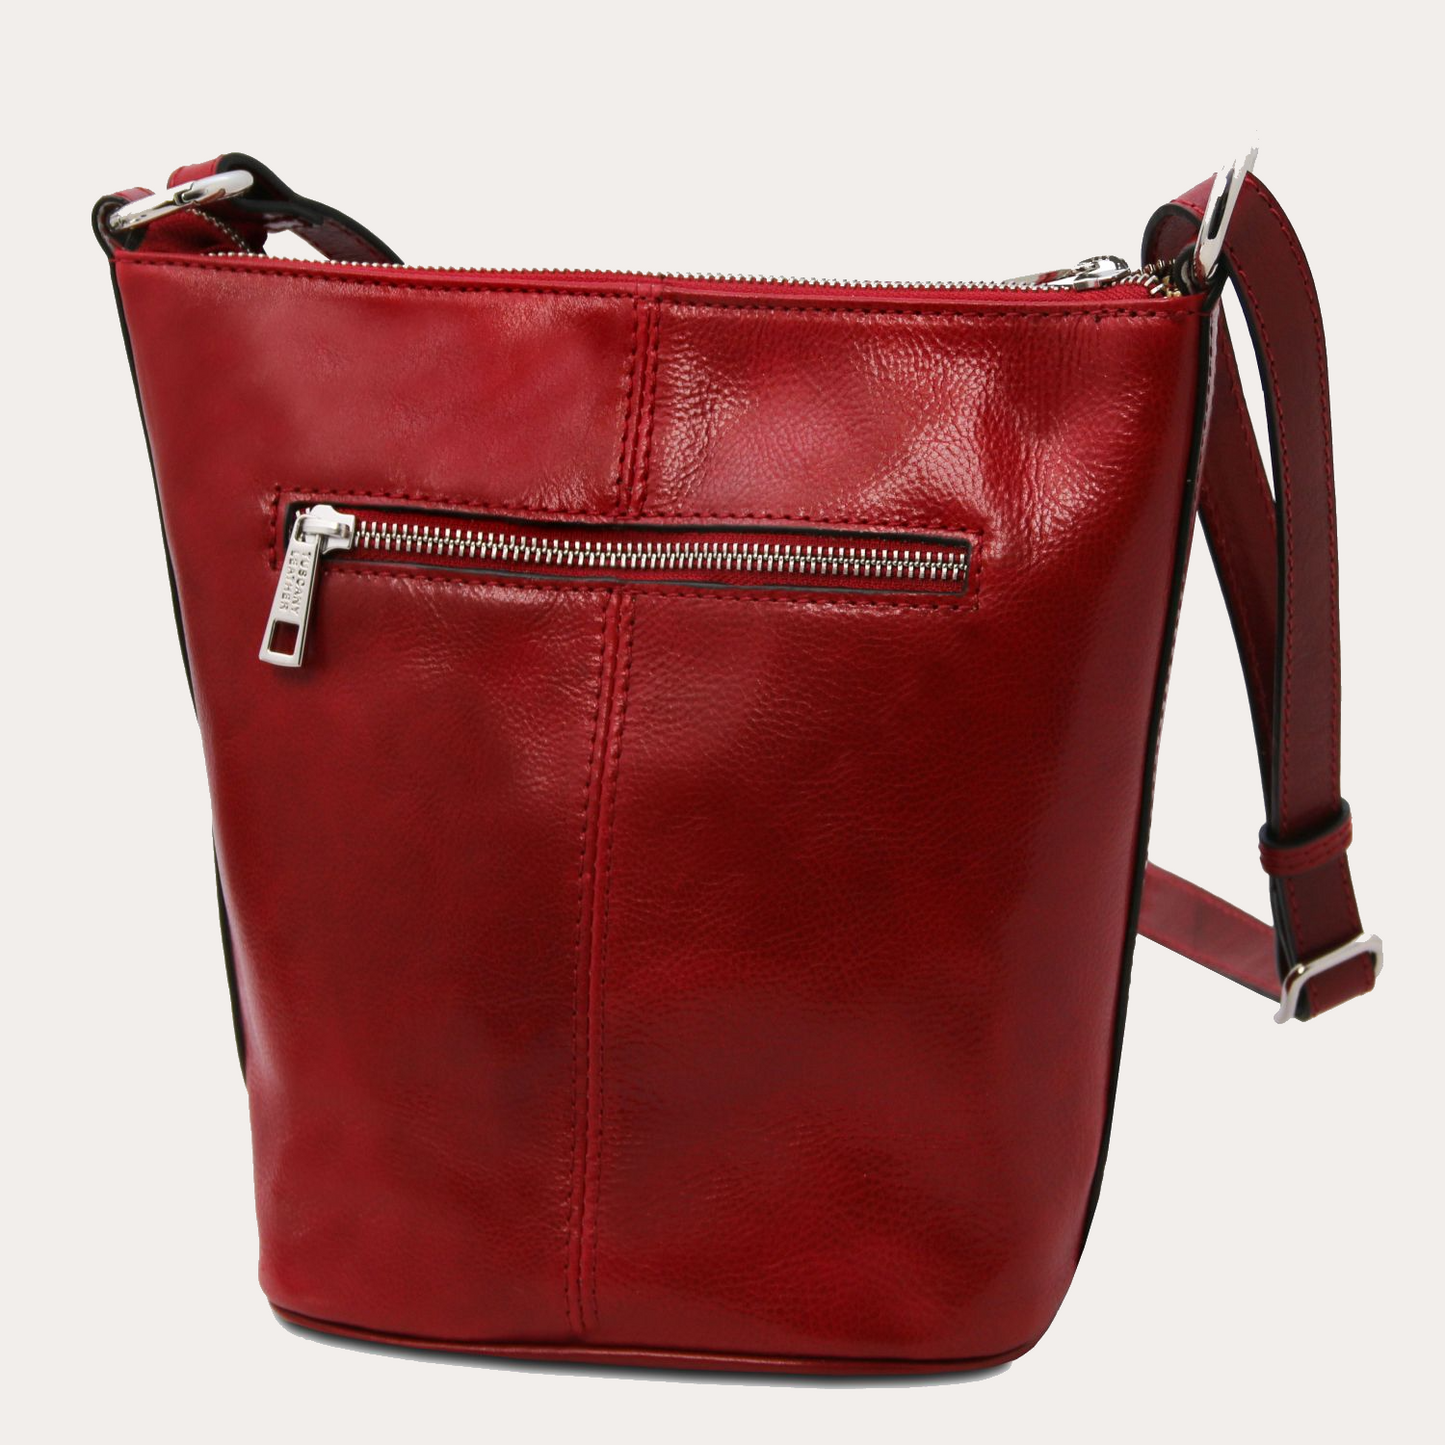 Tuscany Leather Red Leather Shoulder Bag